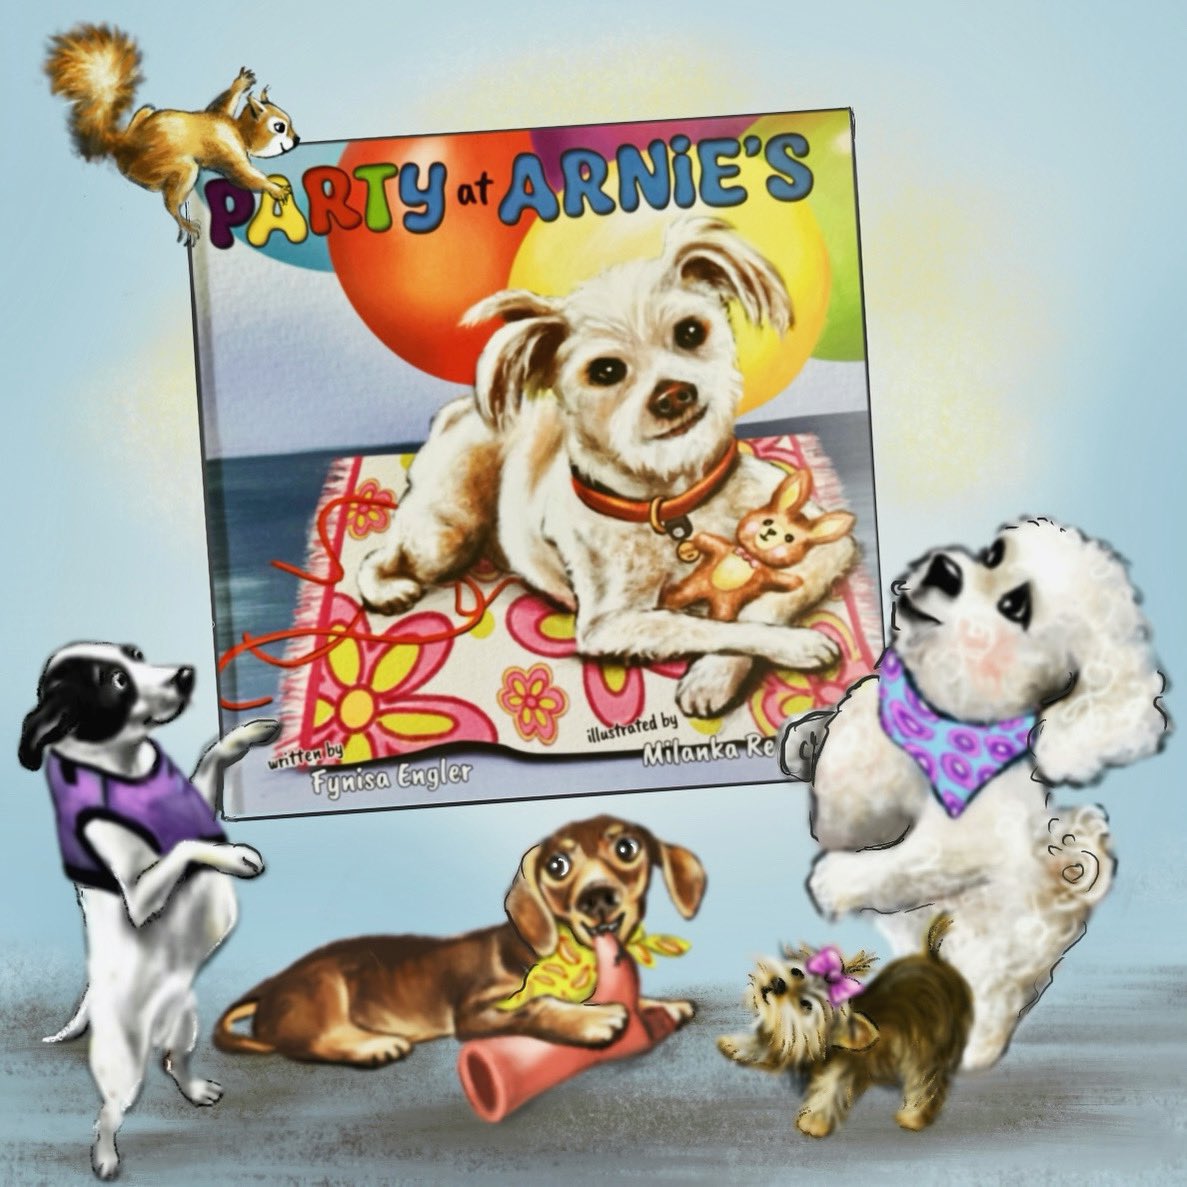 Happy #bookbirthday to PARTY AT ARNIE’S! The dogs are so excited, even the badly behaved Rufus! 
@FynisaAzAuthor @LawleyPublishi1 
#dogparty #dog #picturebooks #kidlit #funnybooks #funnybooksforkids #readaloud #rescuedogs #teachers #librarian #book #birthday #happybookbirthday